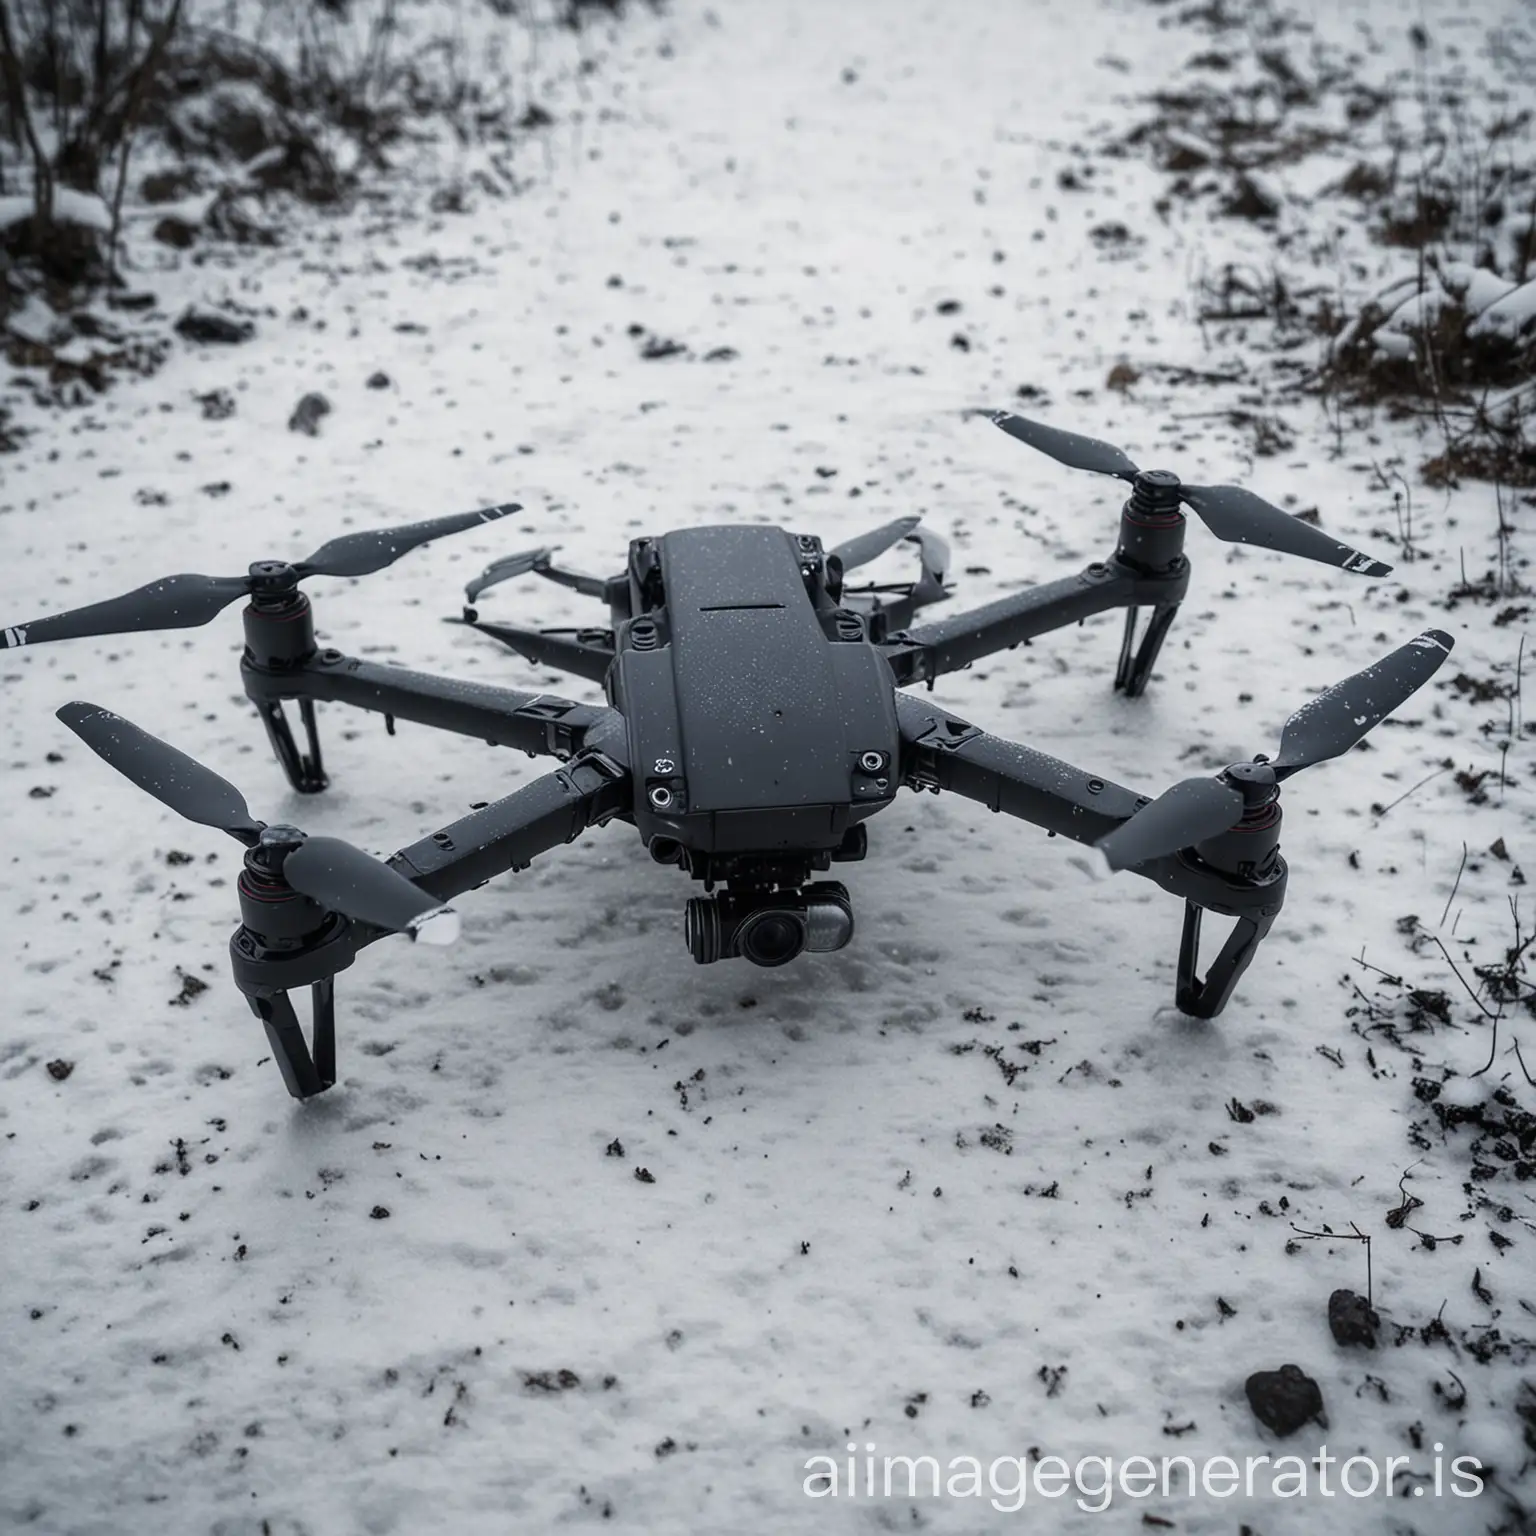 Overall dark tone   A black quadcopter drone works in snowy and rainy weather